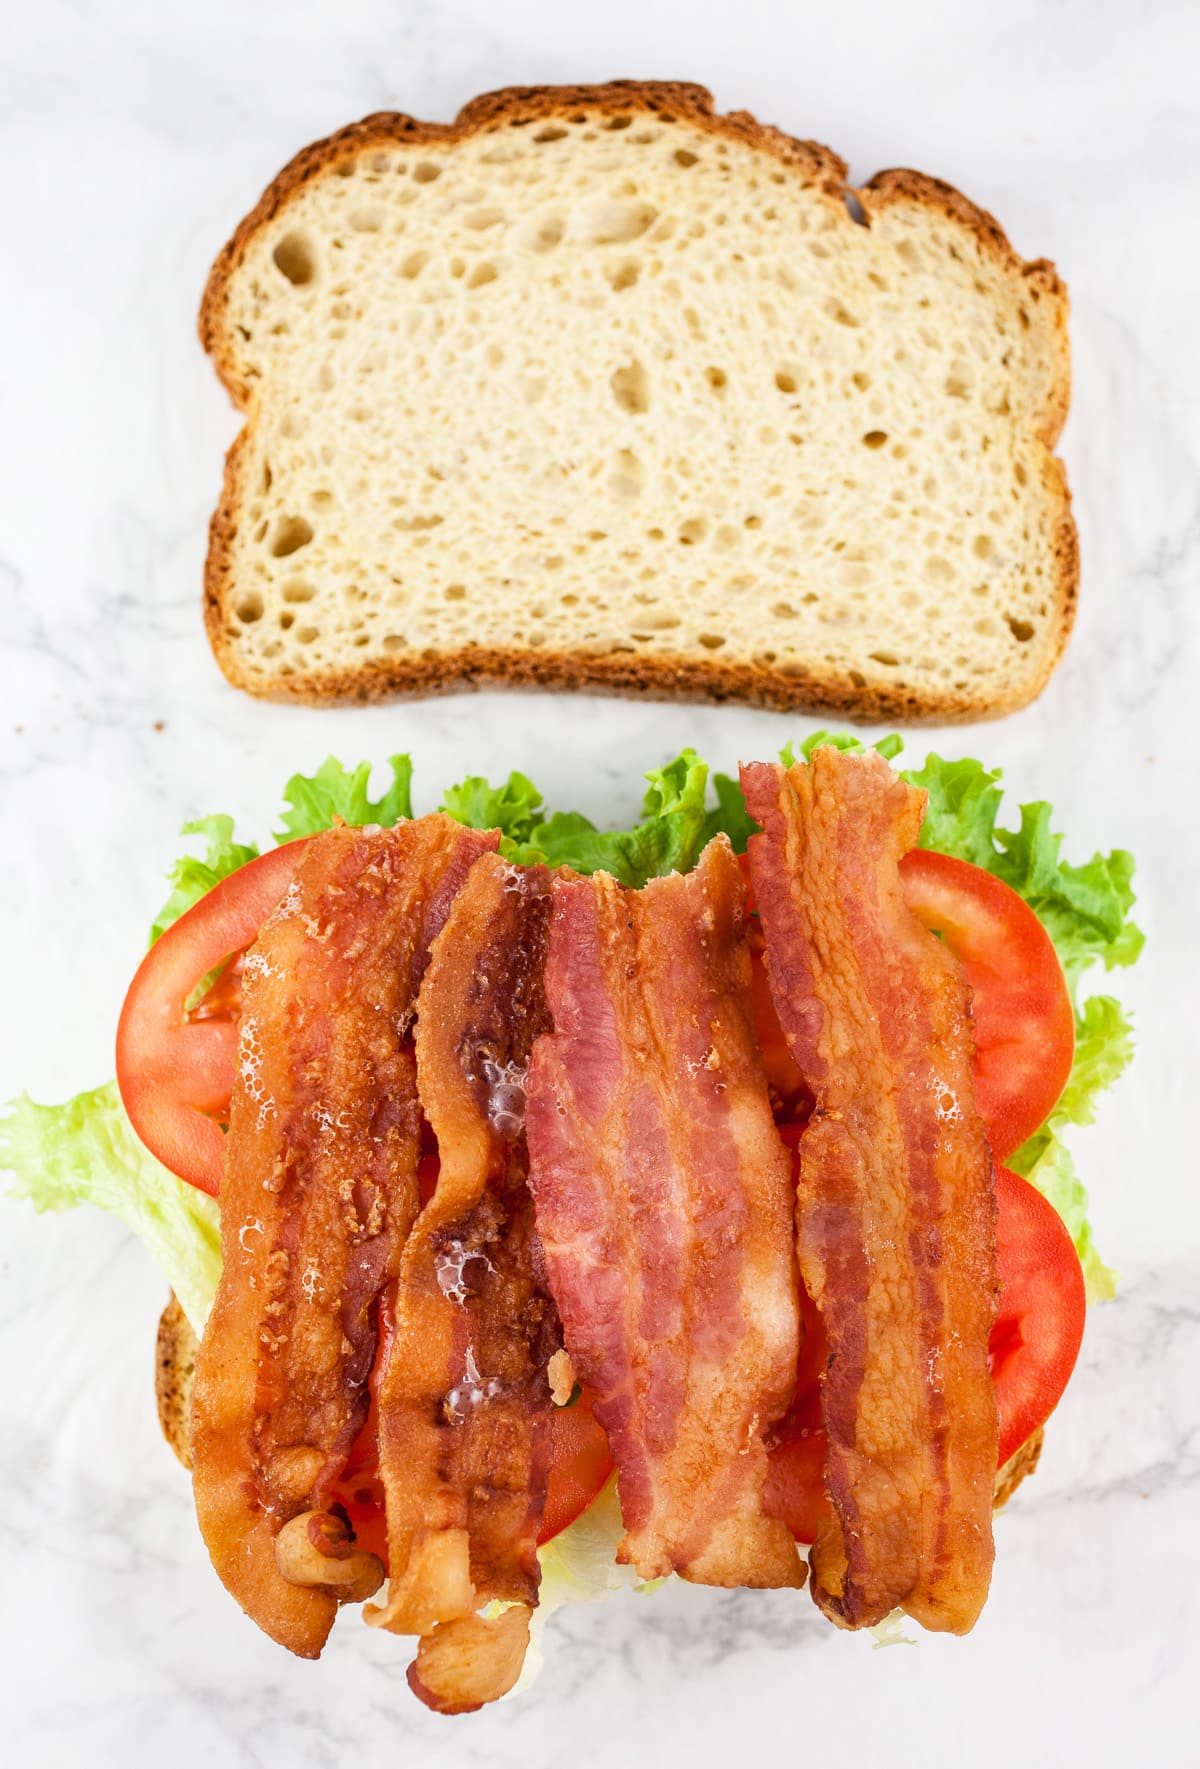 Bread slices with lettuce, tomatoes, and bacon.